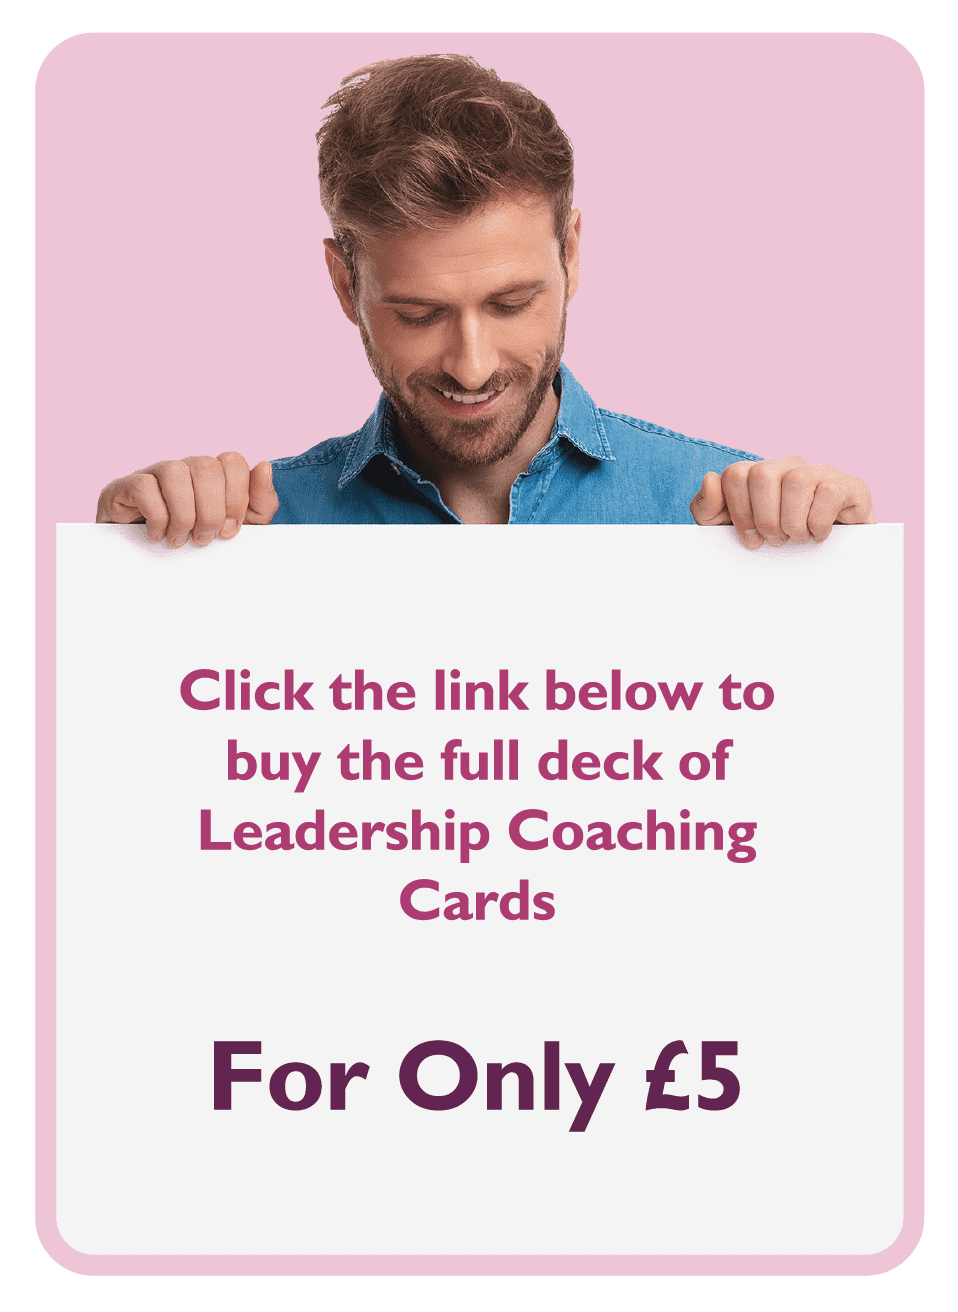 Coaching card titled For Only £5